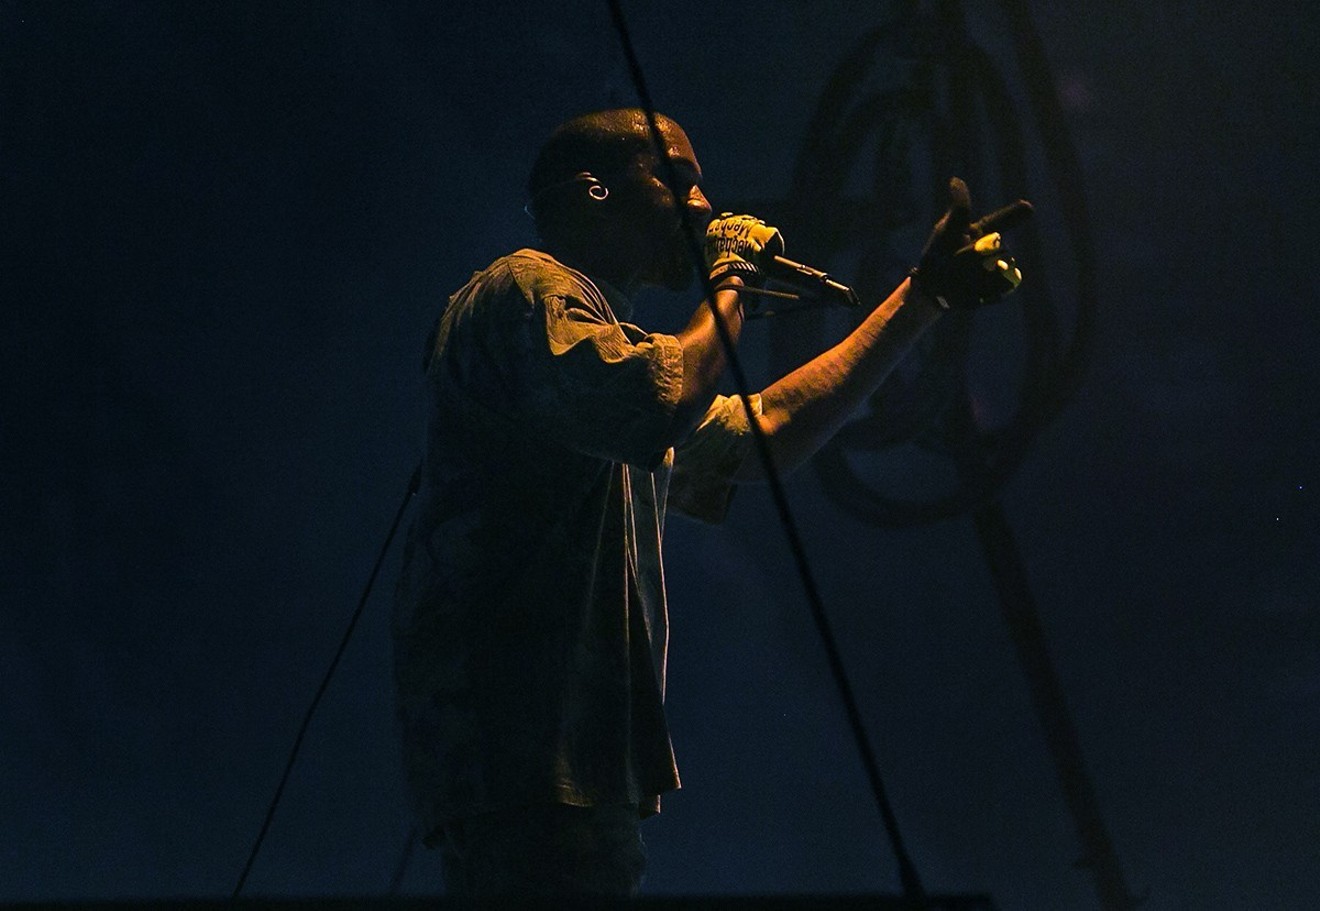 Kanye West performing at the American Airlines Arena in Miami during the Saint Pablo Tour in 2016.